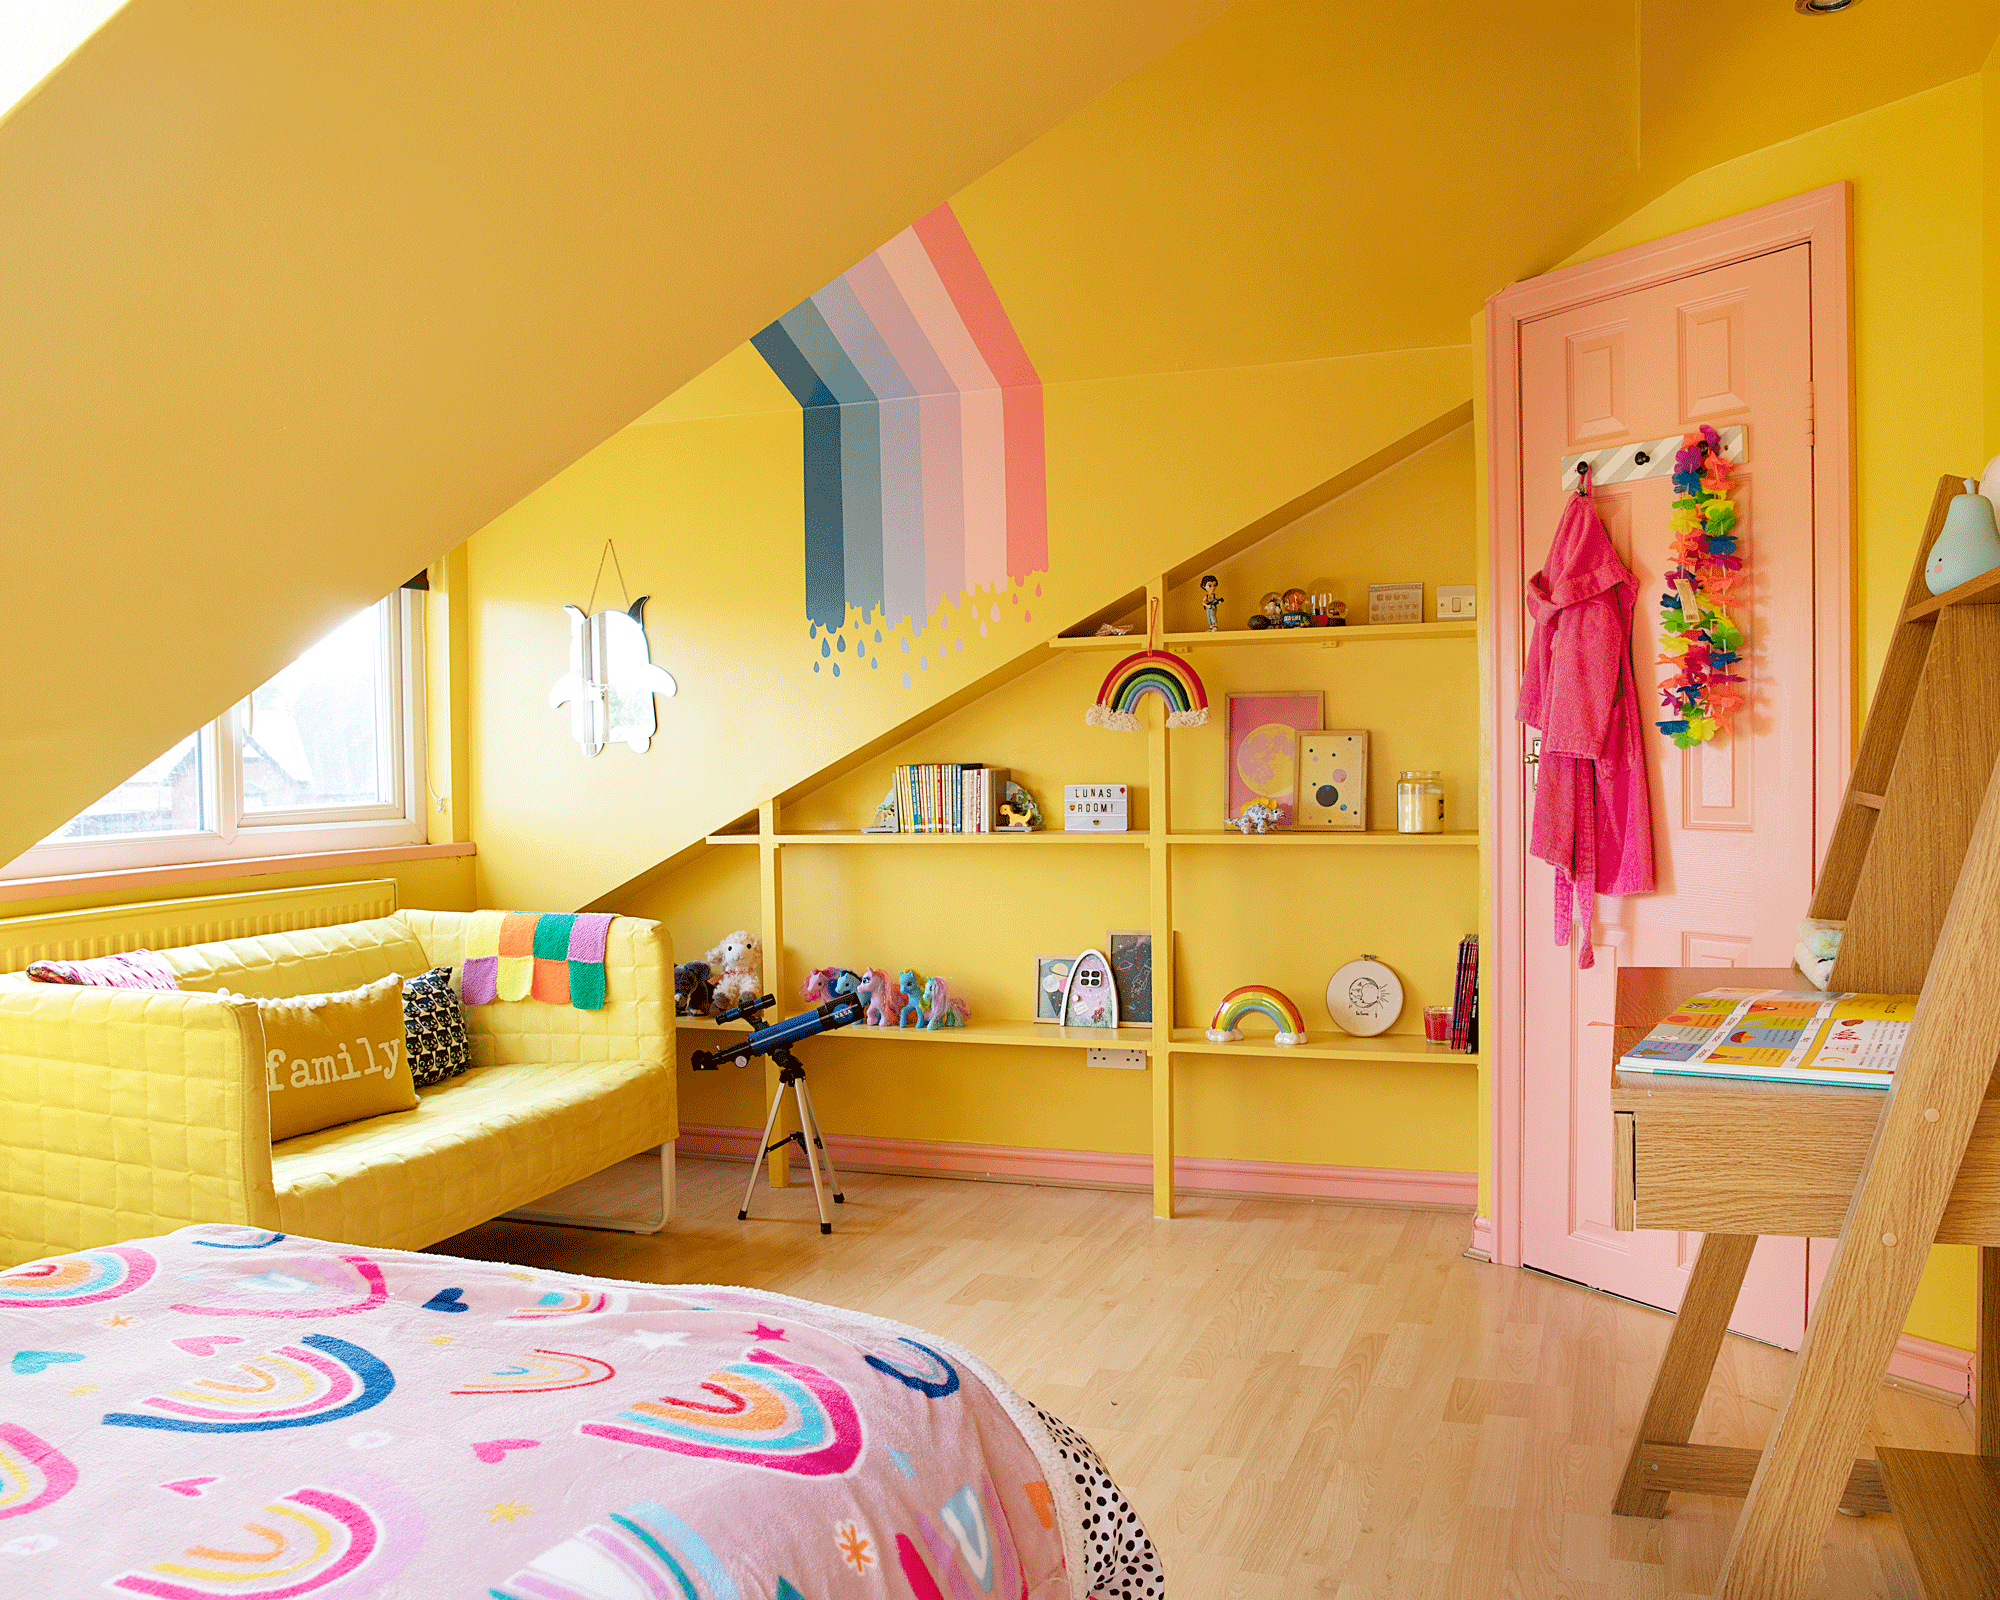 Karen Clough used left over paint to create a rainbow bedroom for less than £100